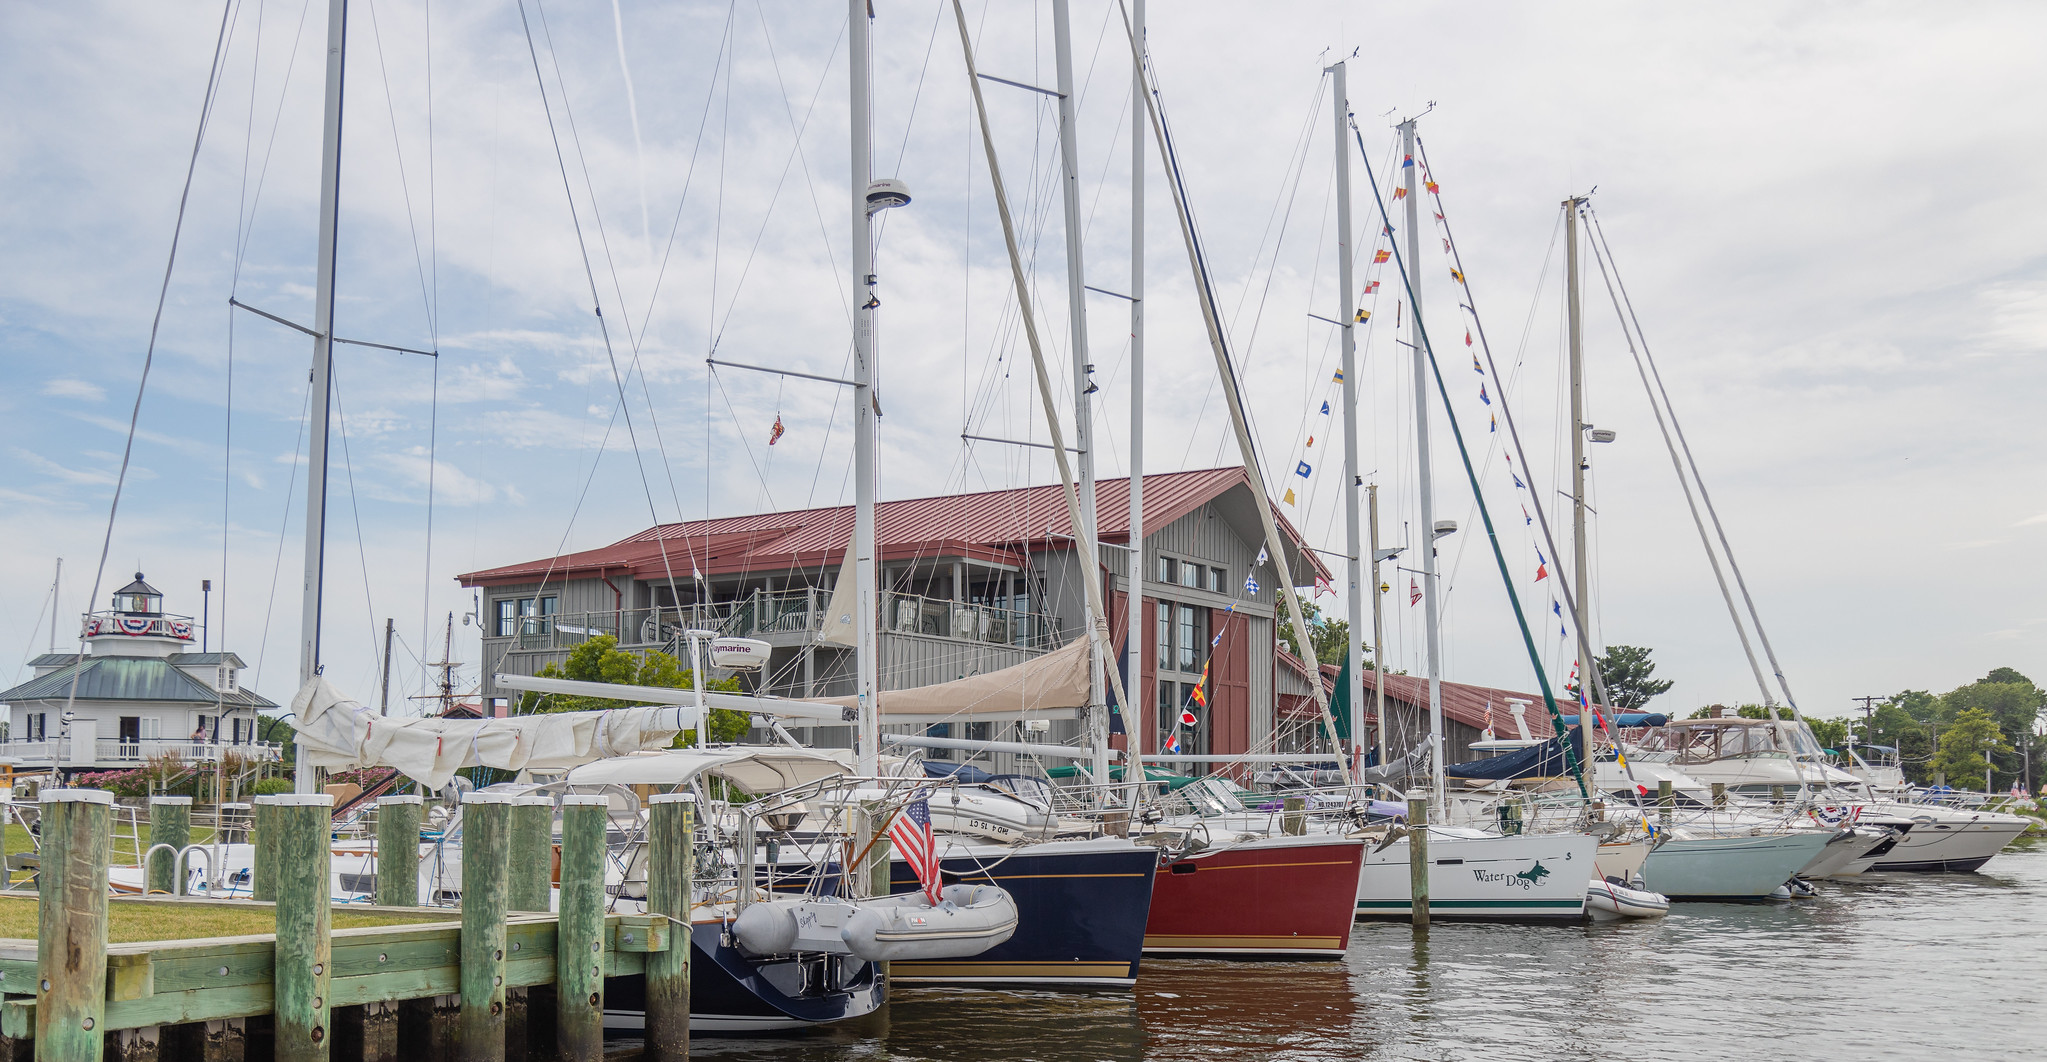 CBMM has streamlined the process of making reservations at its Members-Only Marina through a new partnership with Dockwa.